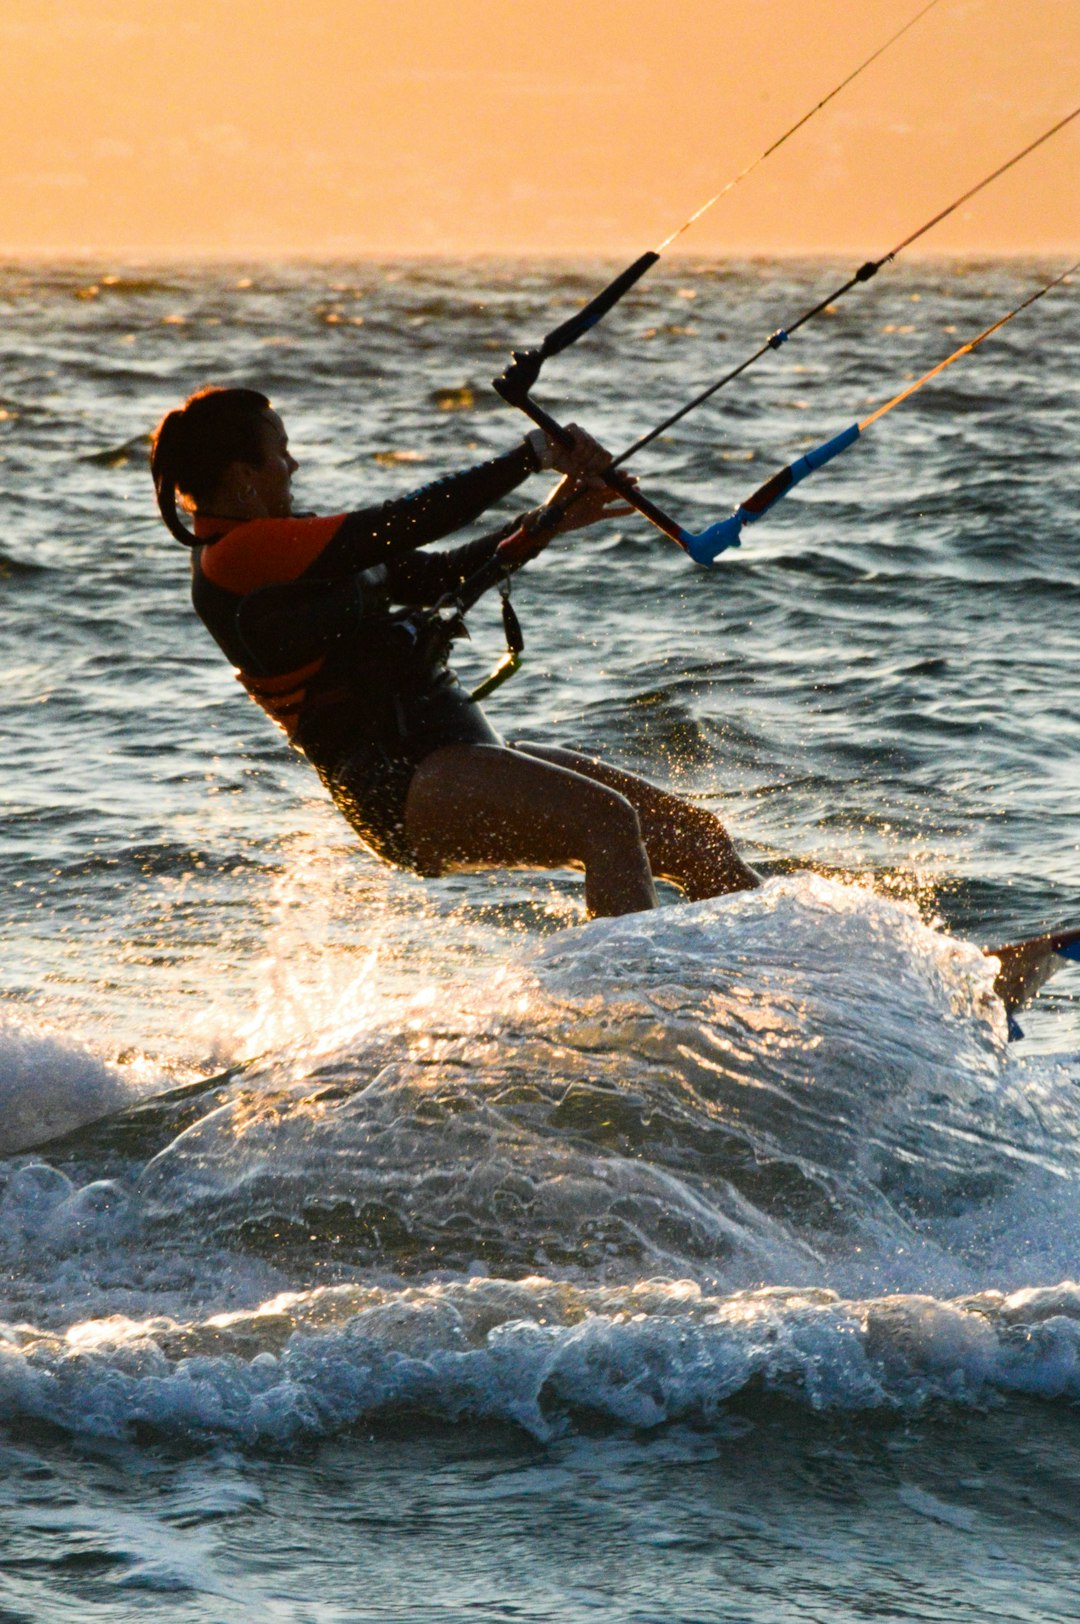 travelers stories about Kitesurfing in Hyères, France